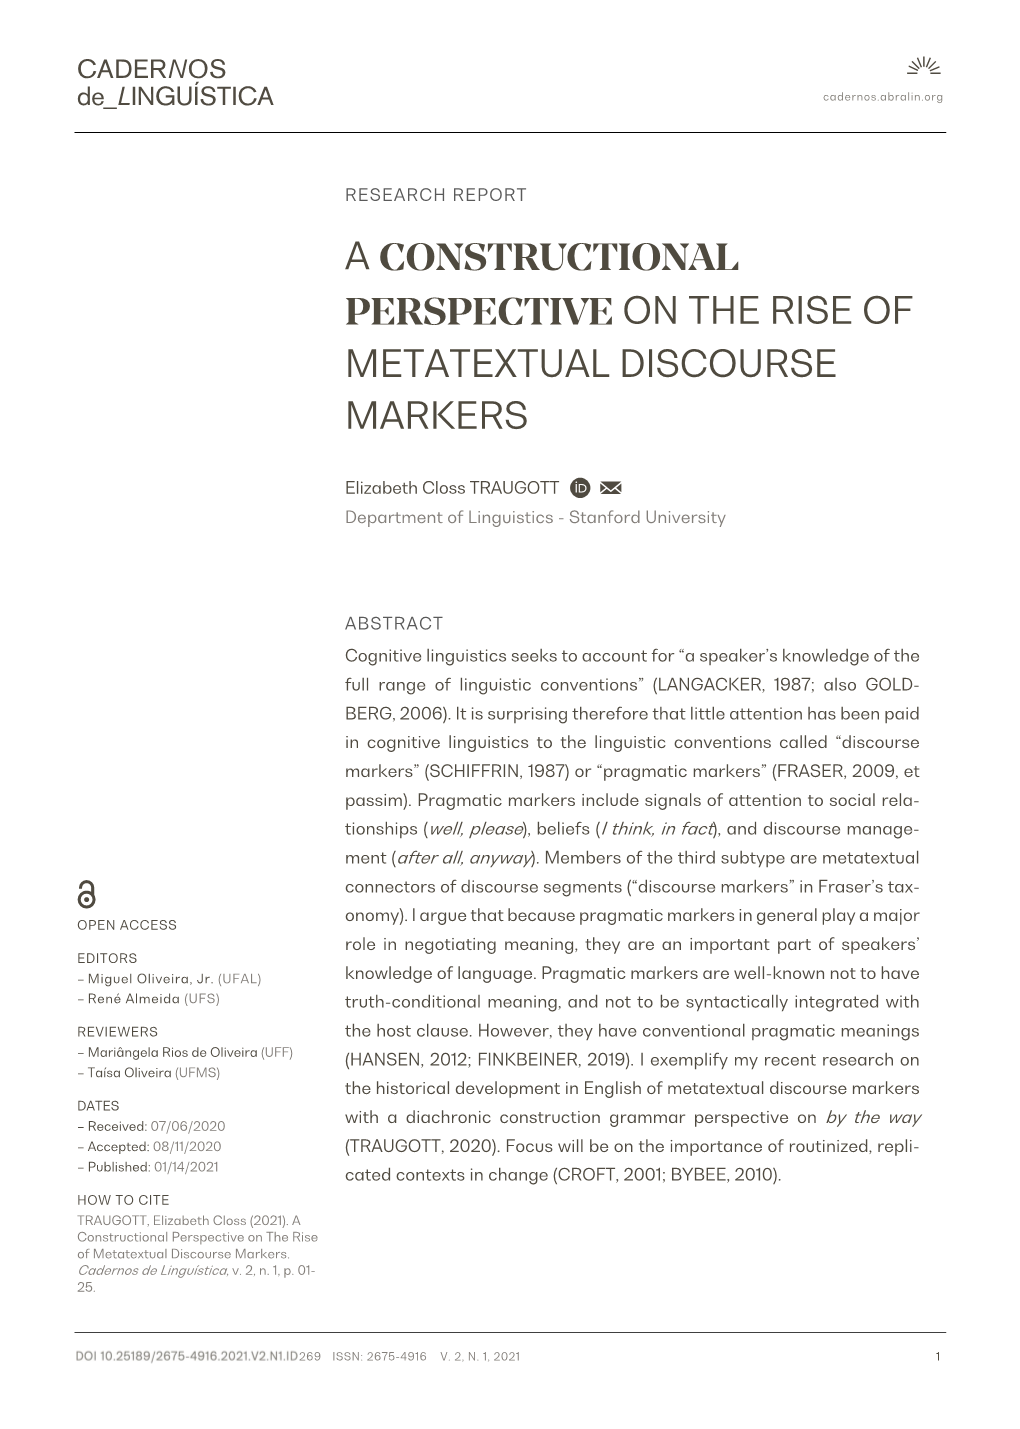 A Constructional Perspective on the Rise of Metatextual Discourse Markers